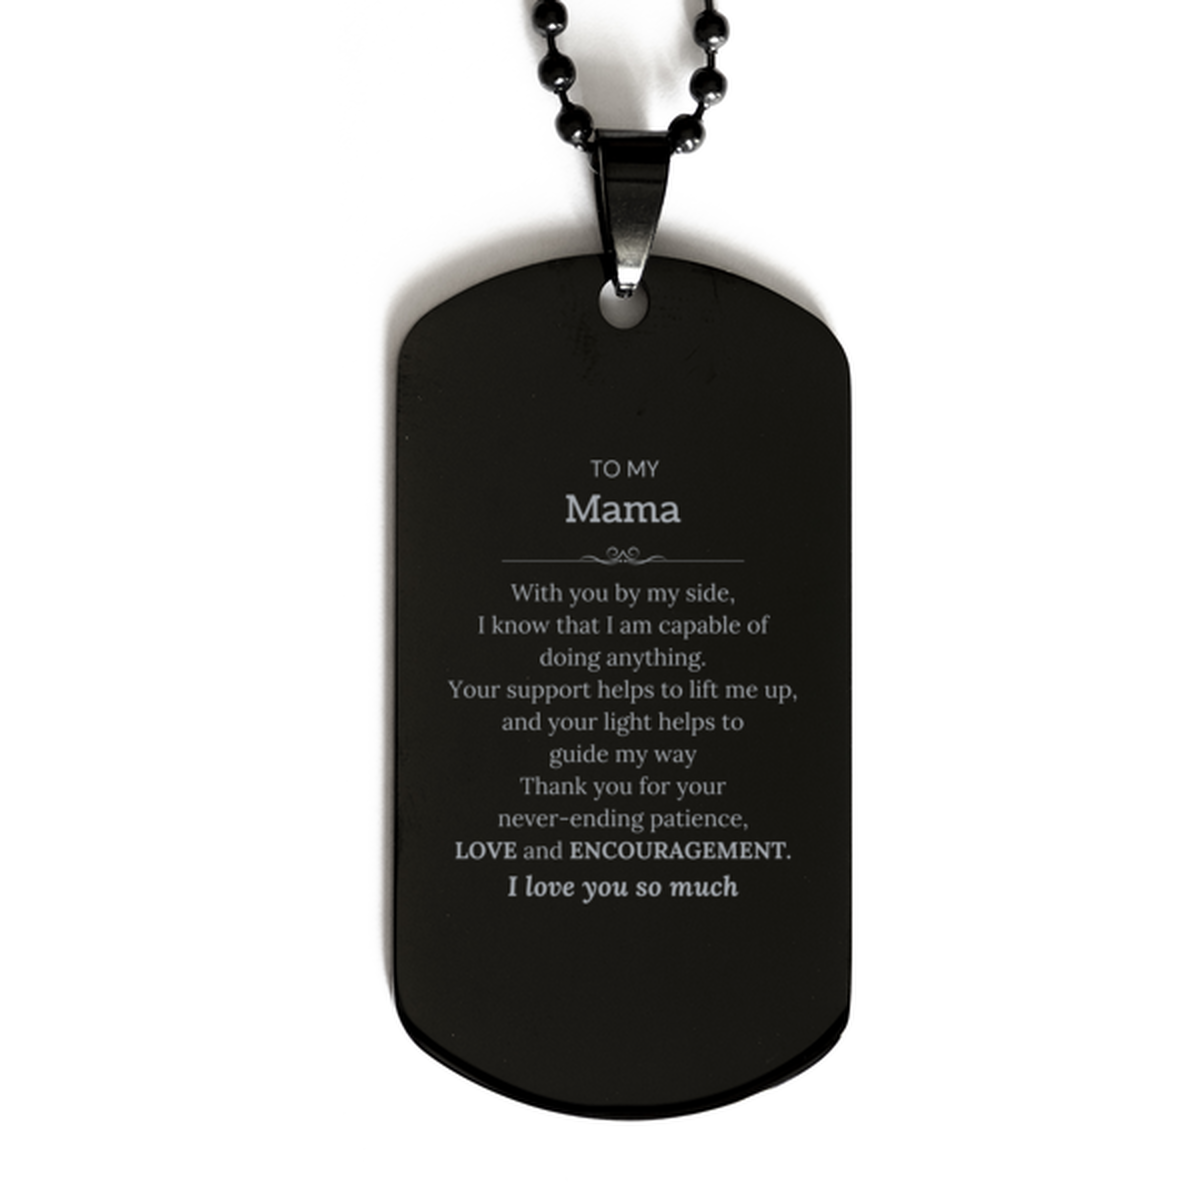 Appreciation Mama Black Dog Tag Gifts, To My Mama Birthday Christmas Wedding Keepsake Gifts for Mama With you by my side, I know that I am capable of doing anything. I love you so much